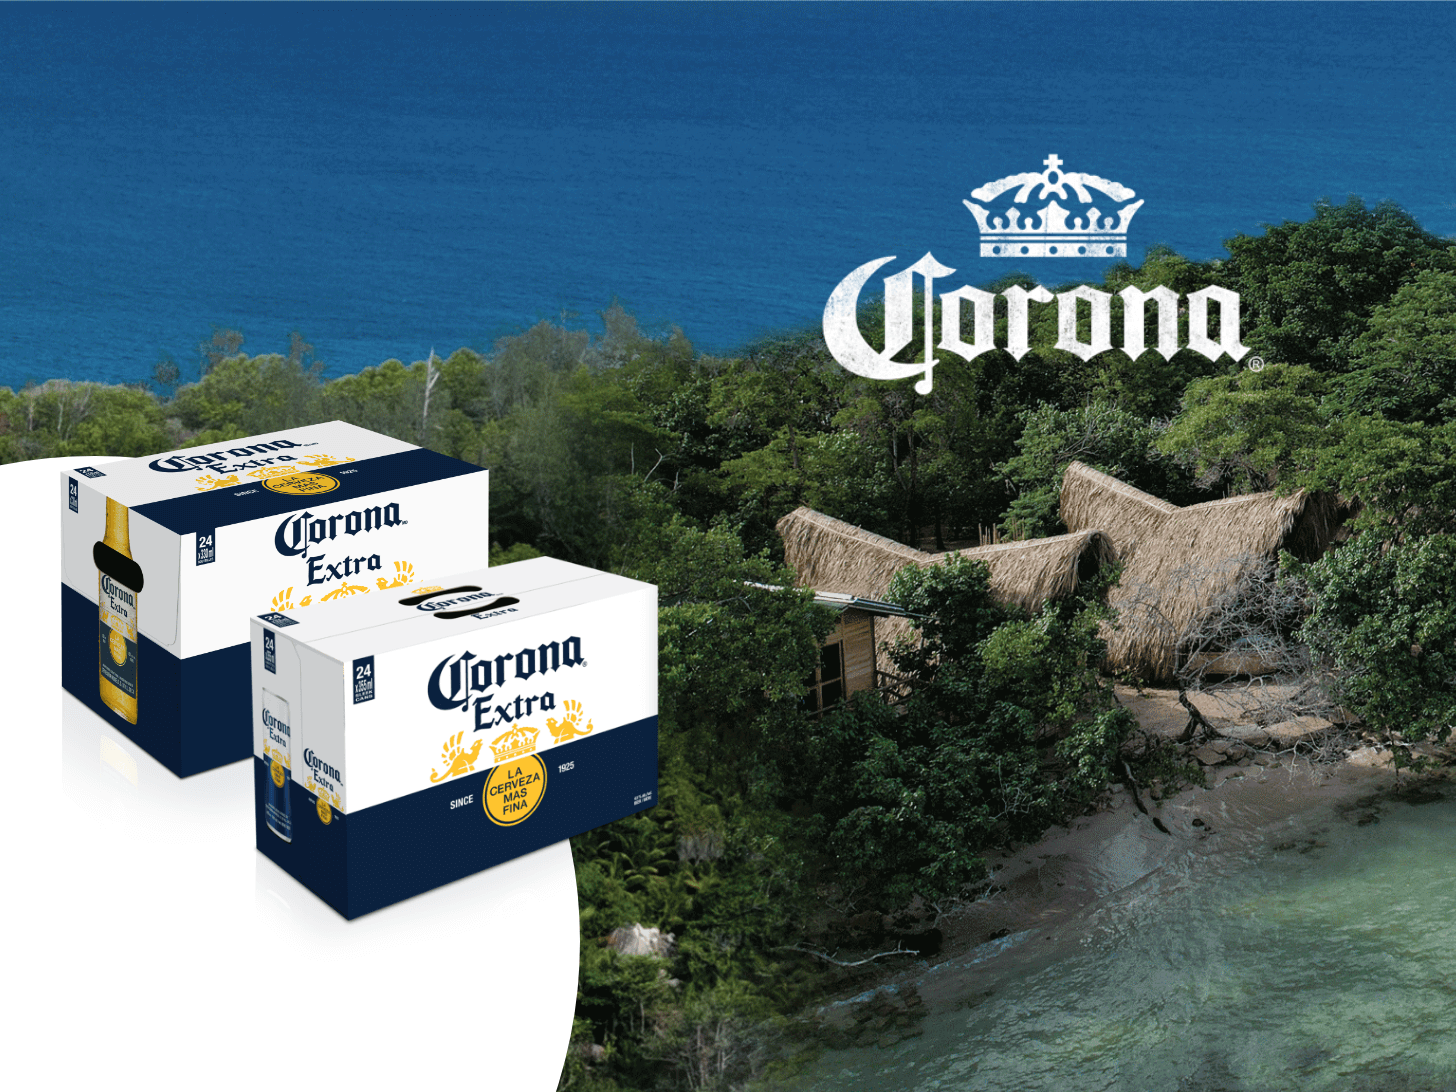 enter for a chance to win 1 trip for one winner and three (3) guests to Cartagena and Corona Island in Colombia